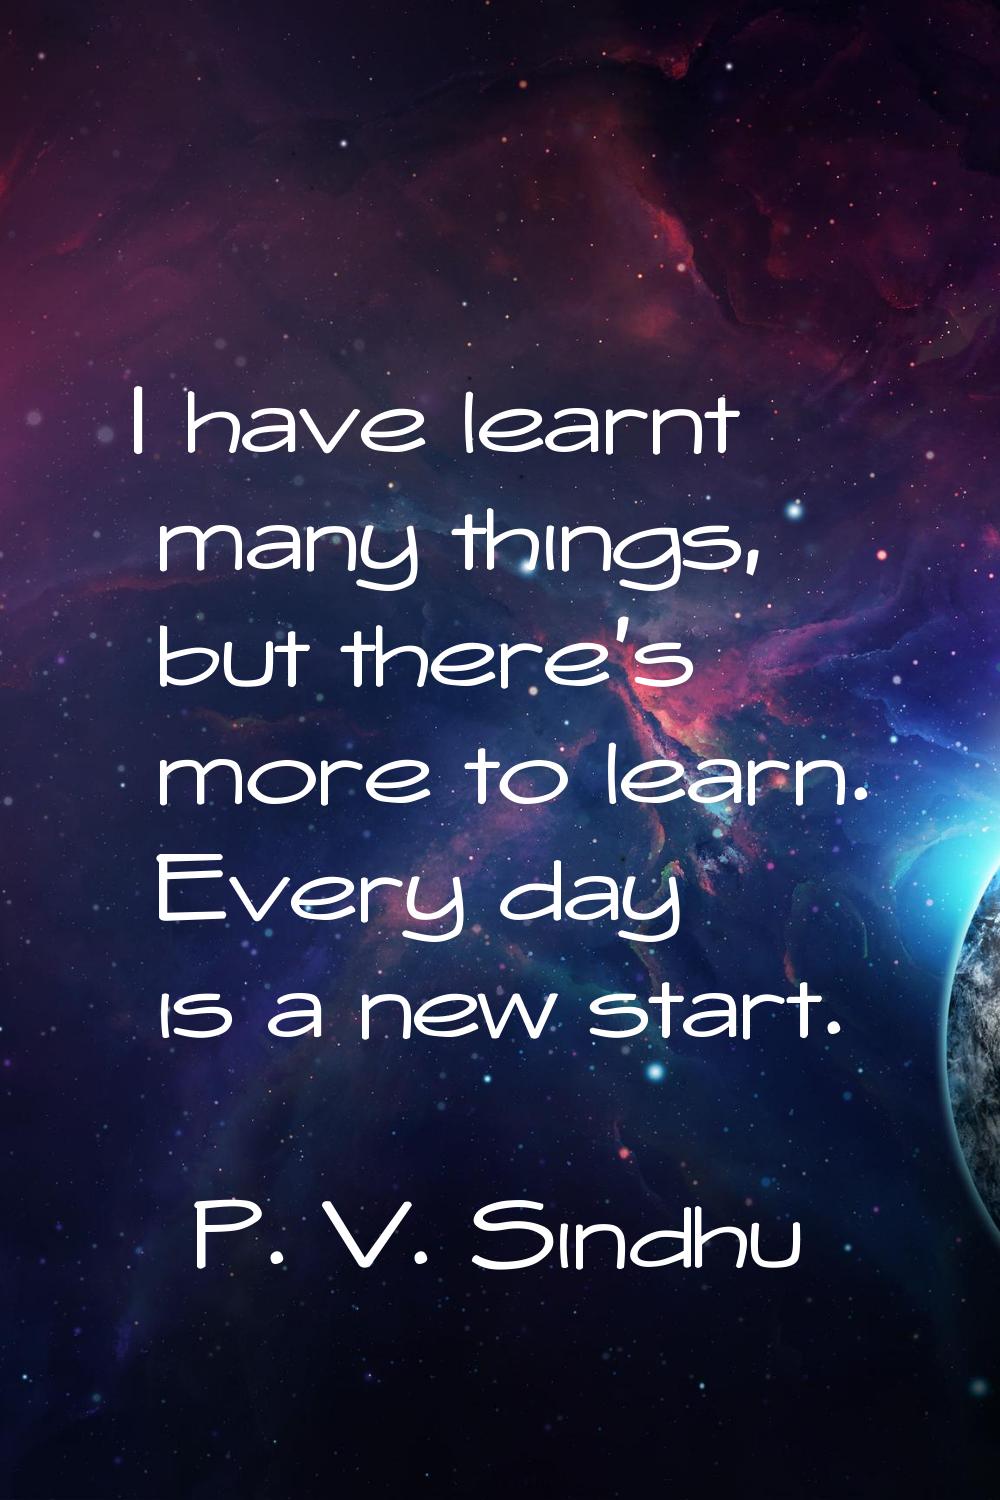 I have learnt many things, but there's more to learn. Every day is a new start.